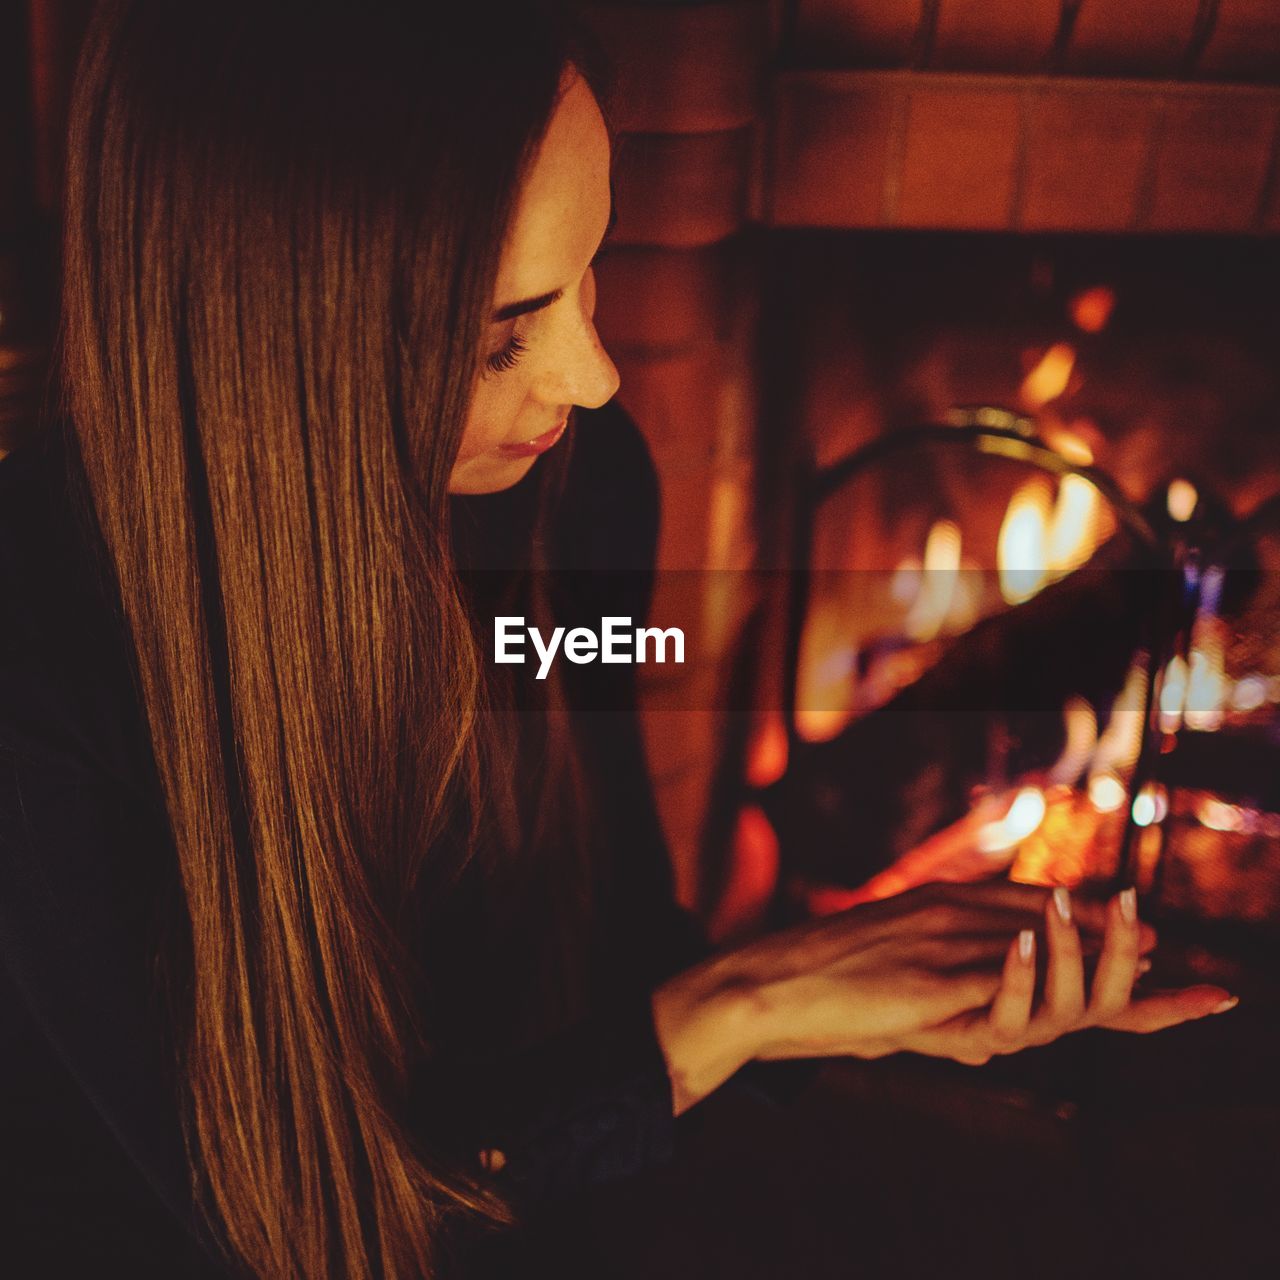 Woman with long hair sitting by fireplace at home